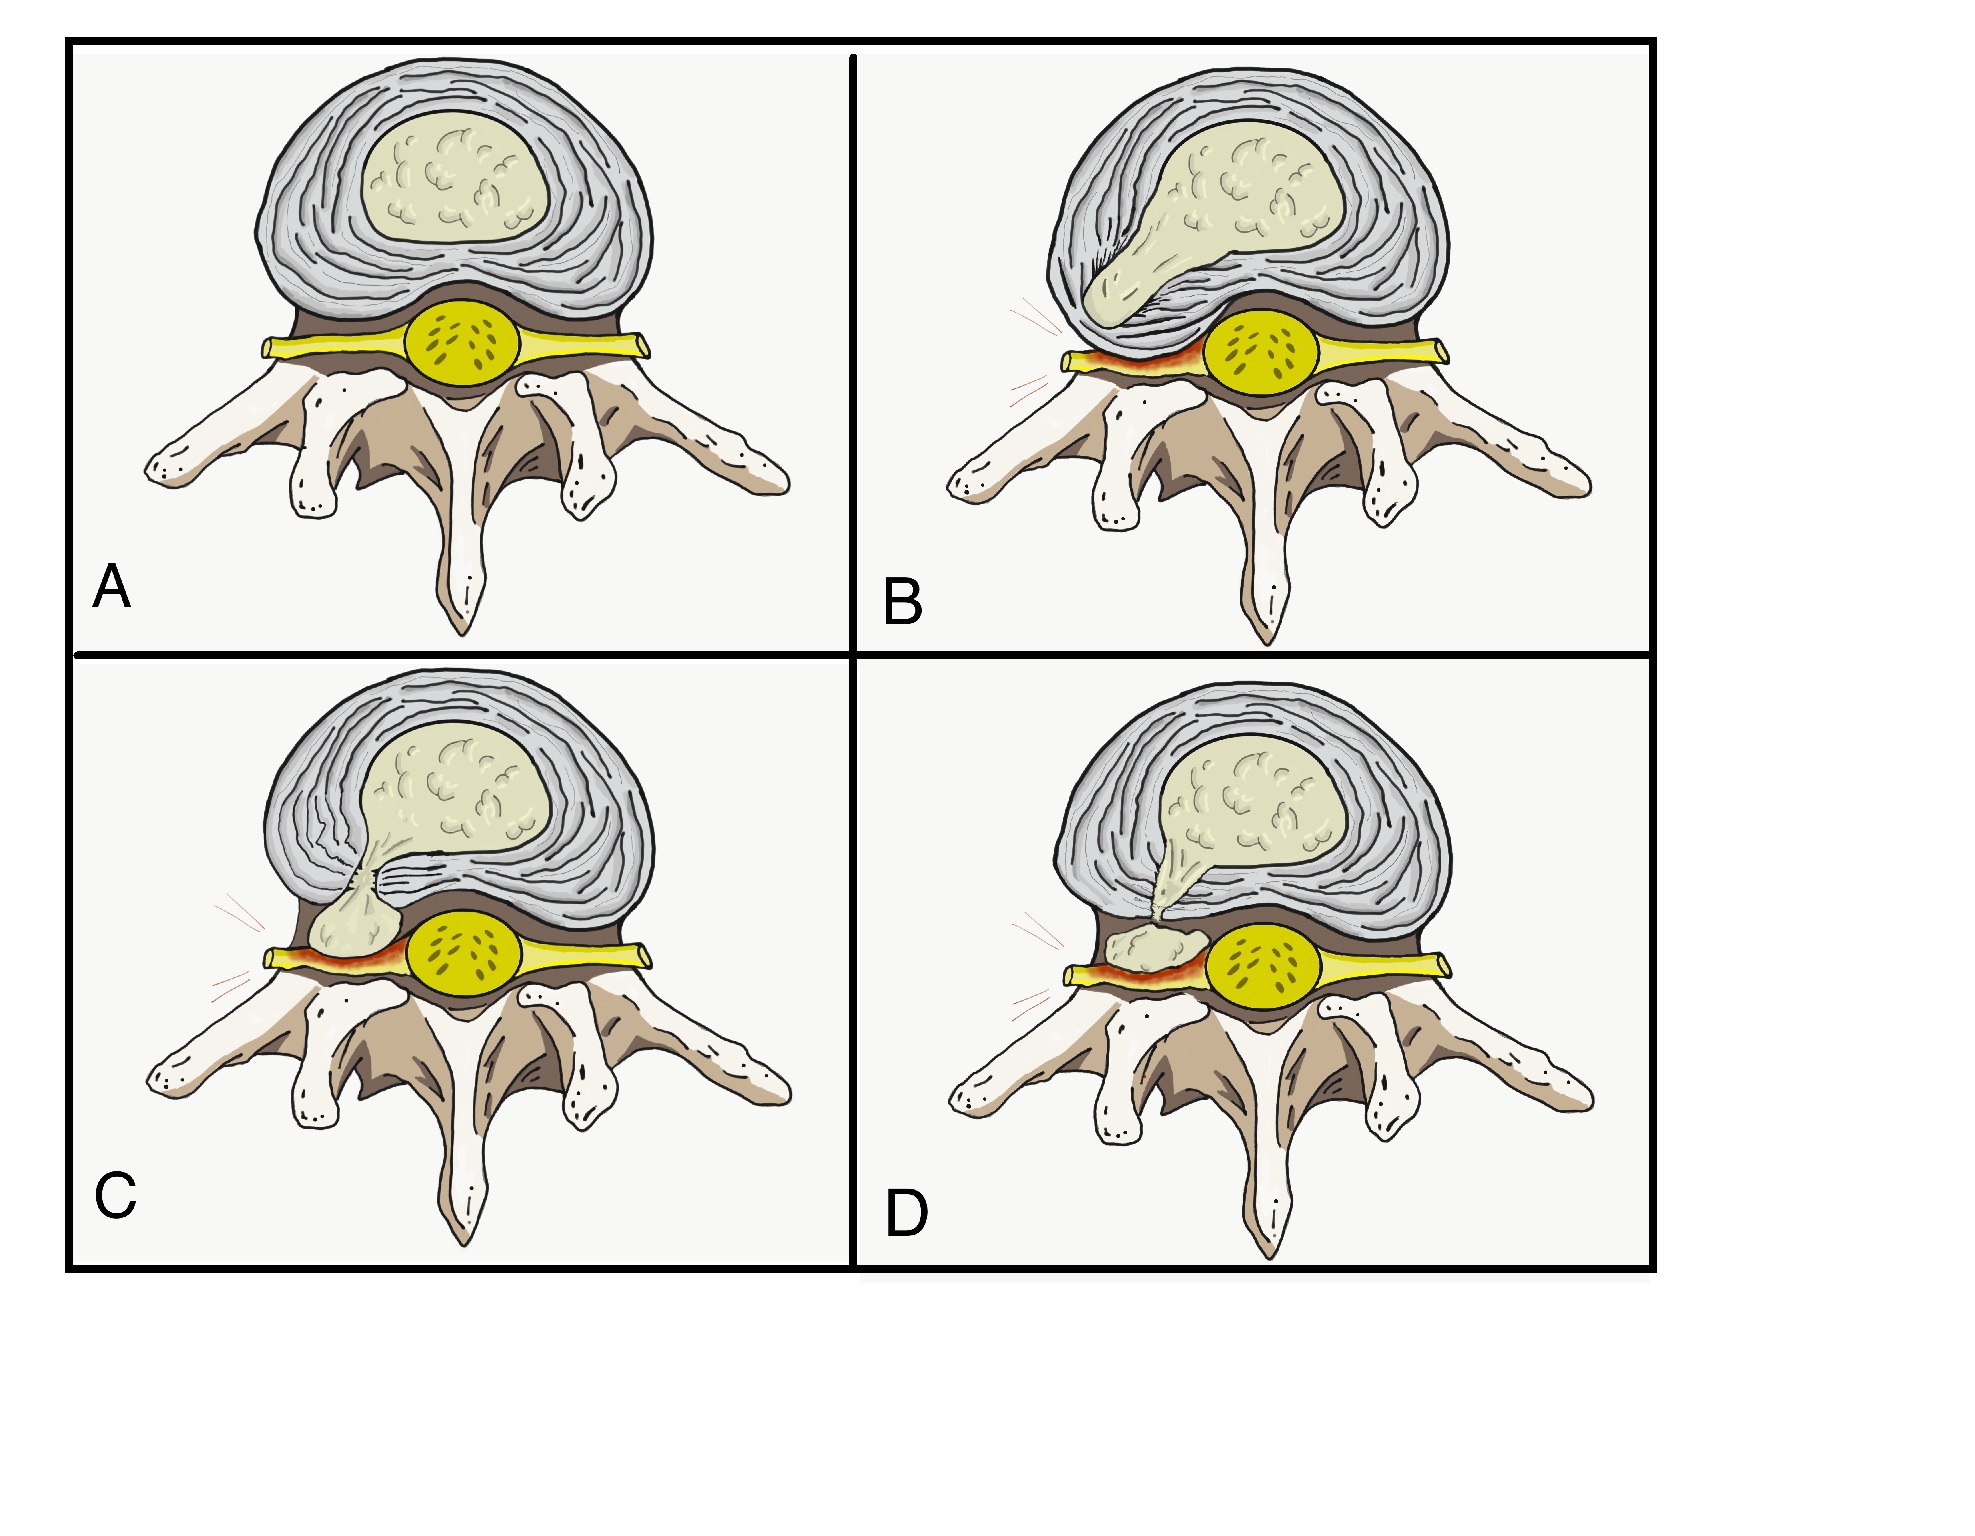 Figure 1. A) Normal disc anatomy B) Disc Protrusion C) Disc Extrusion D) Disc Sequestration
